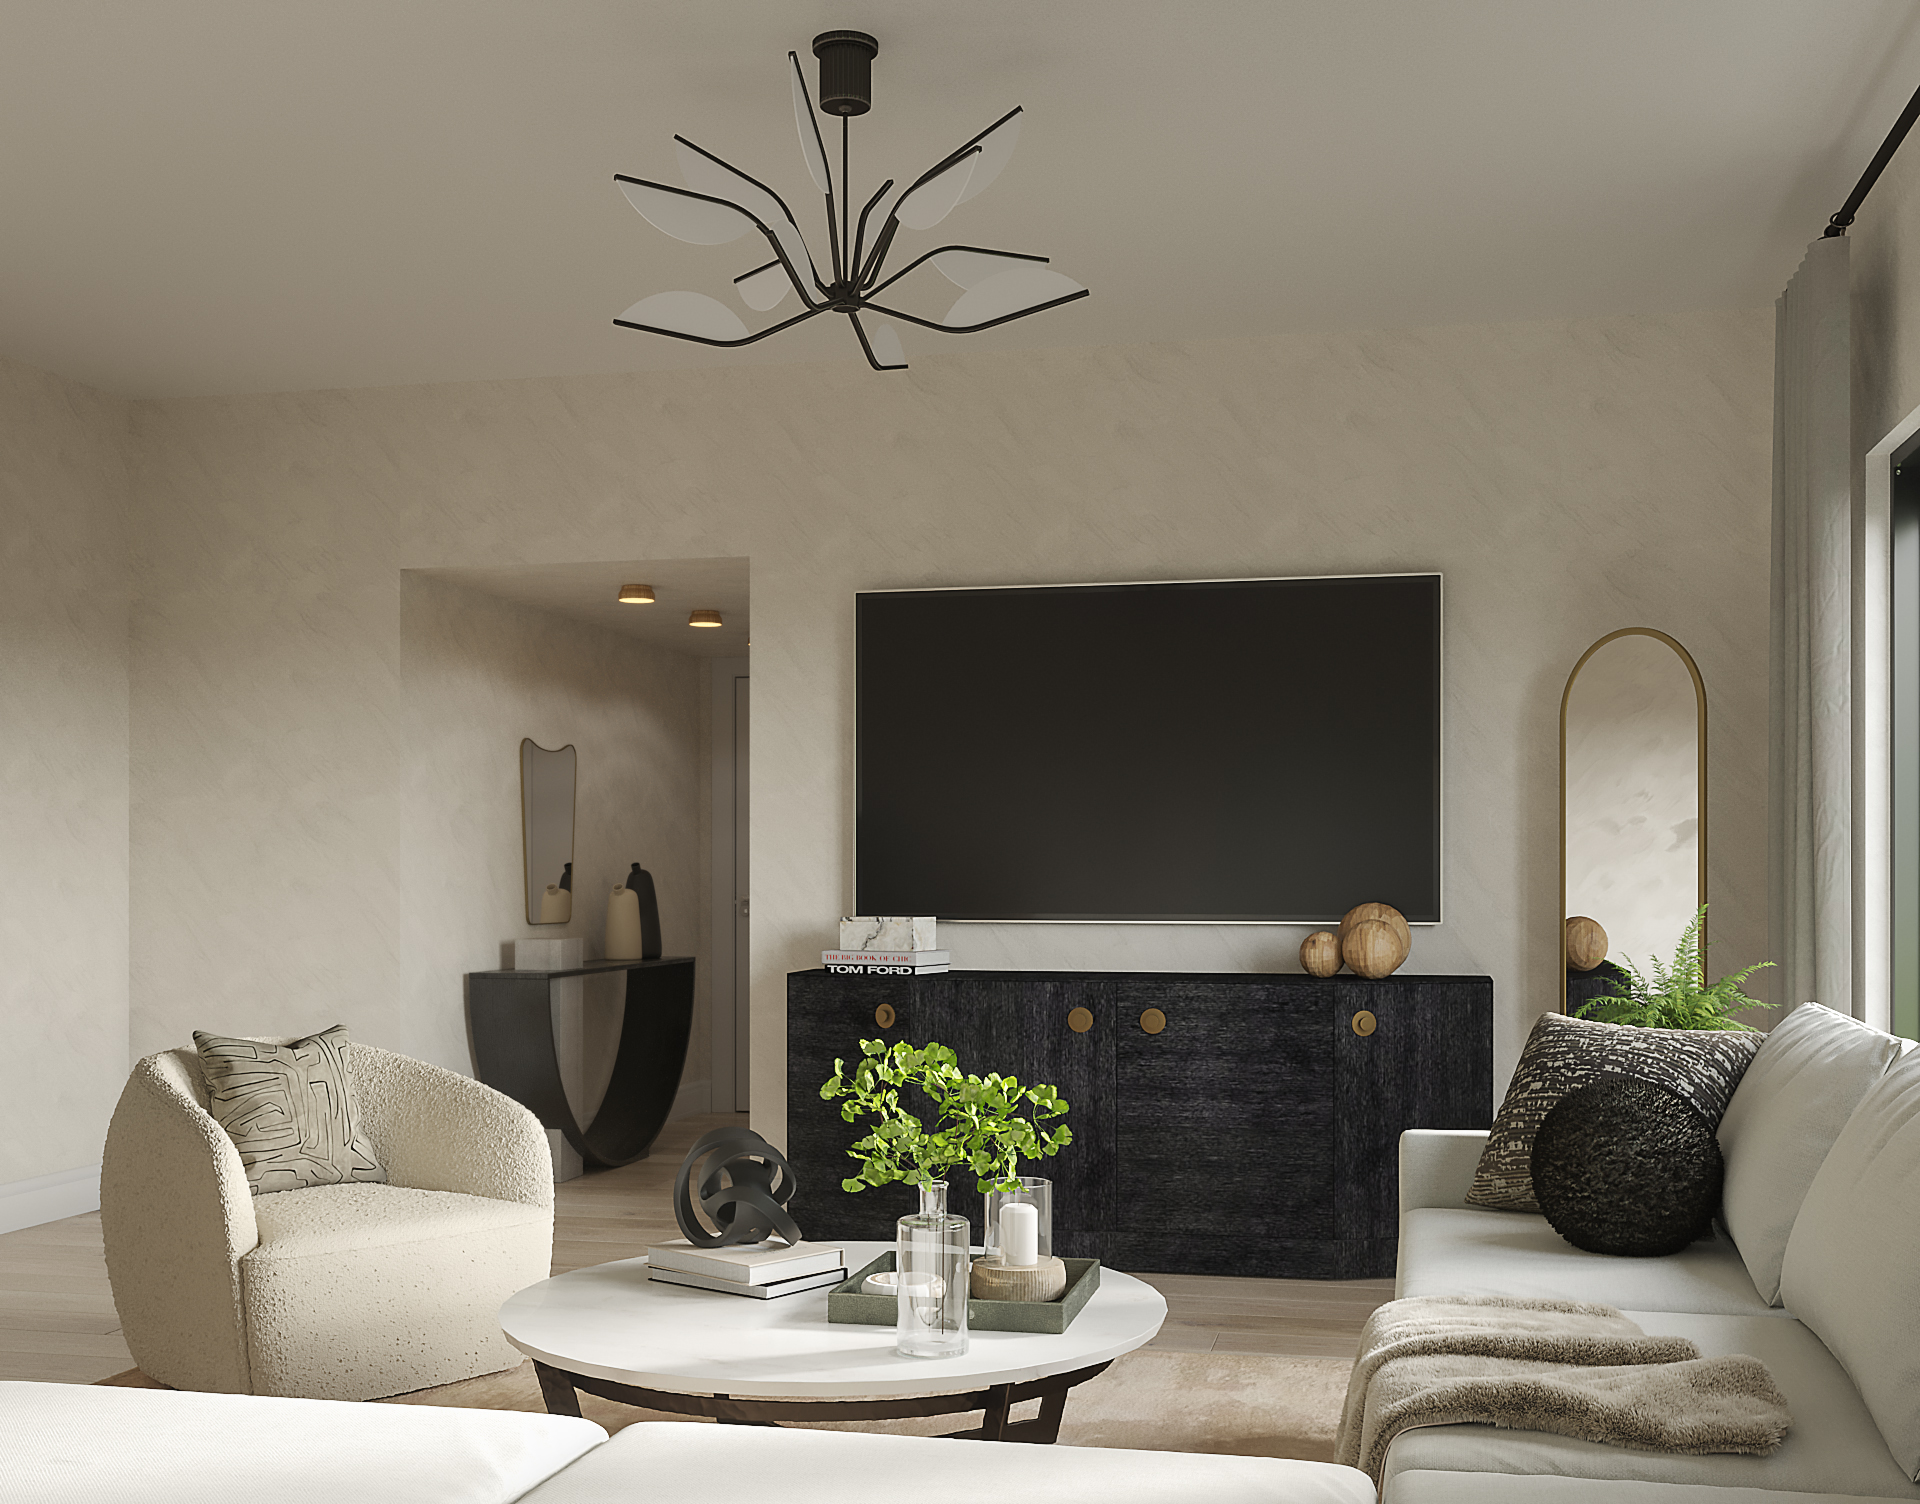 Decorating A Living Room With Glitz And Glam